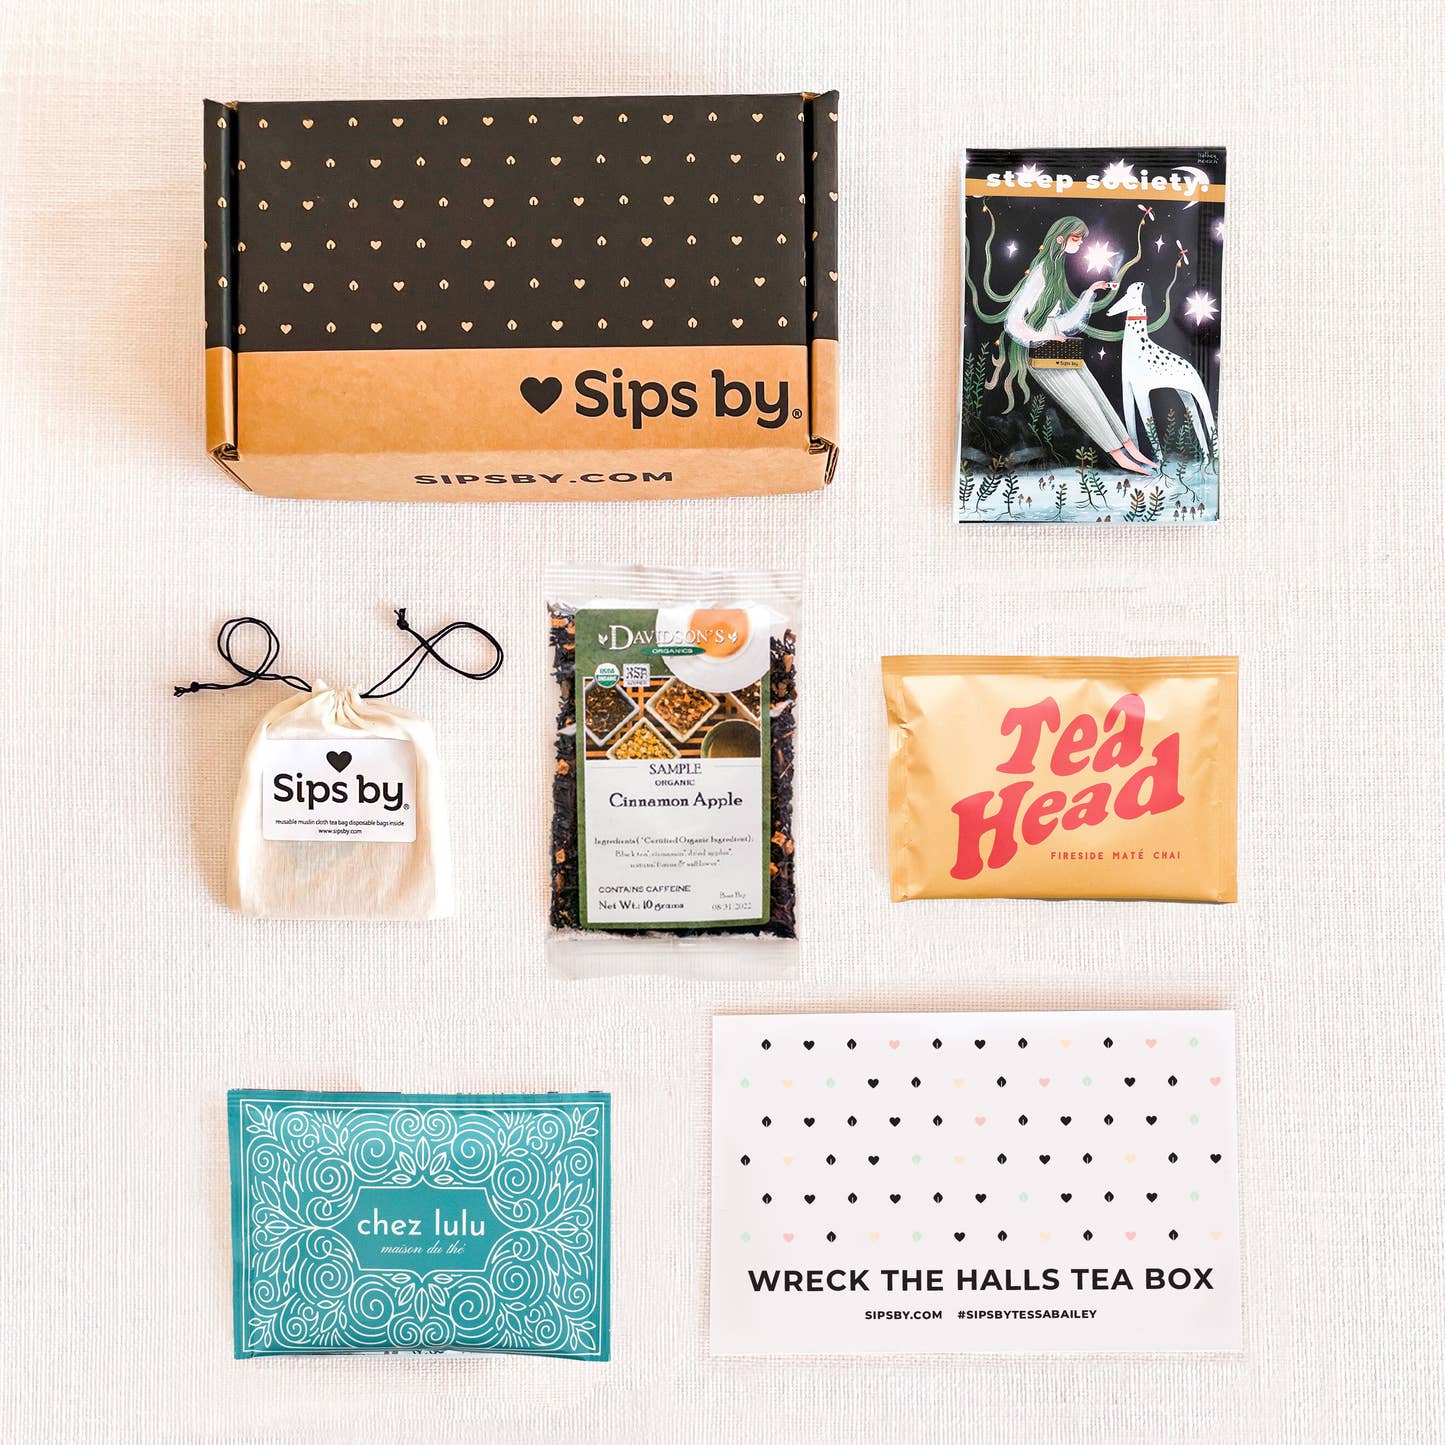 Sips by x Tessa Bailey Wreck the Halls Tea Box contents with four loose leaf tea pouches, a Sips by Box, printed insert, and muslin pouch with tea filters